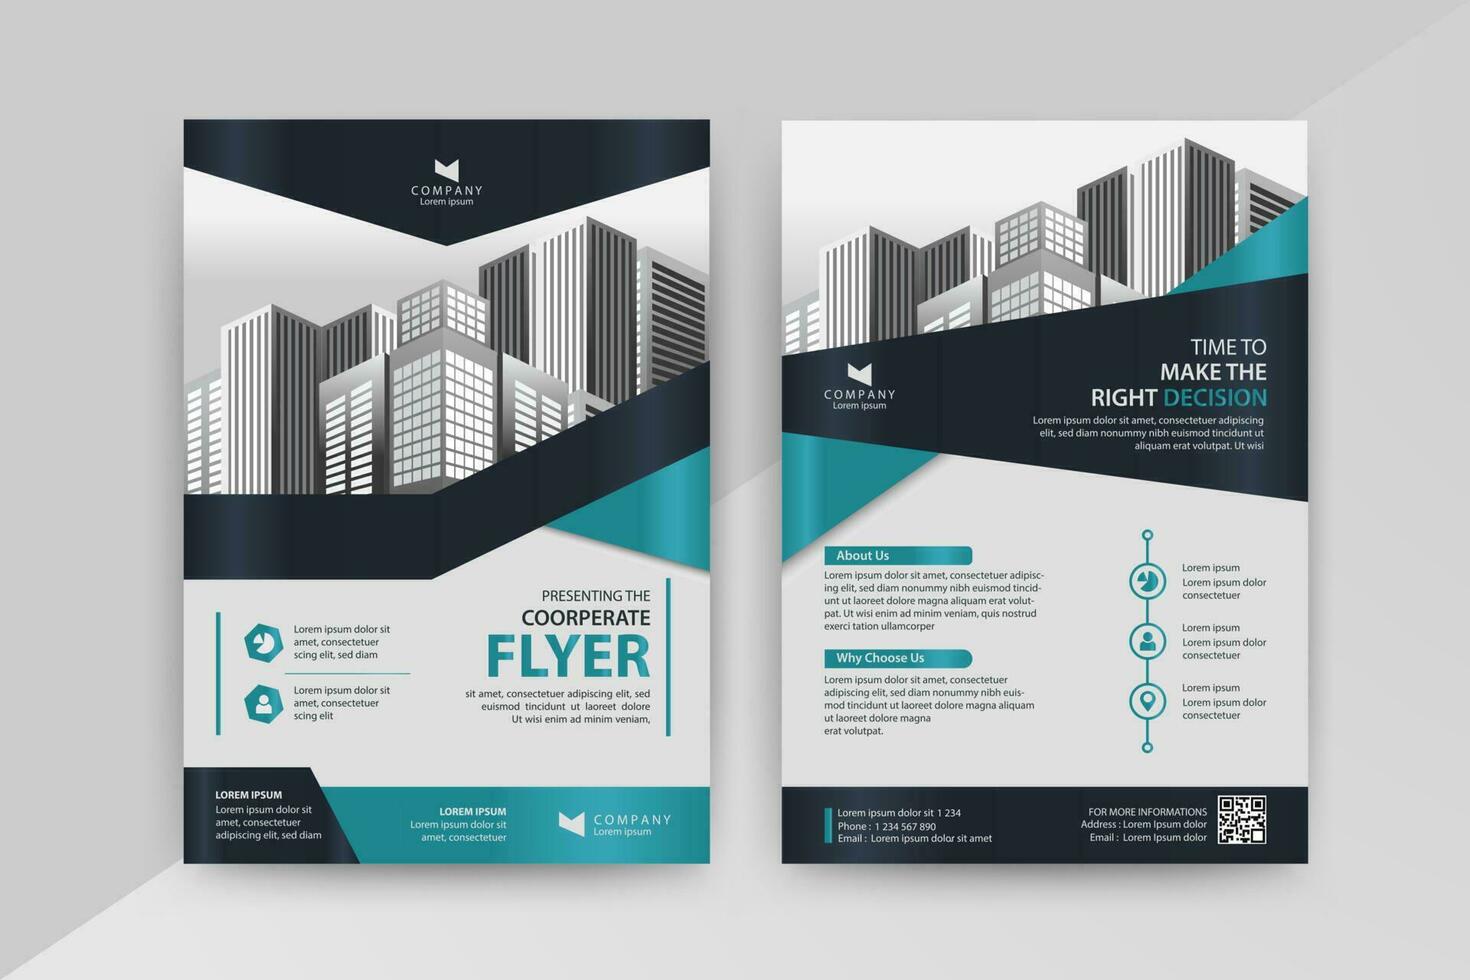 Business abstract vector template for Flyer, Brochure, AnnualReport, Magazine, Poster, Corporate Presentation, Portfolio, Market, infographic With Blue and Cyan color size A4, Front and back.